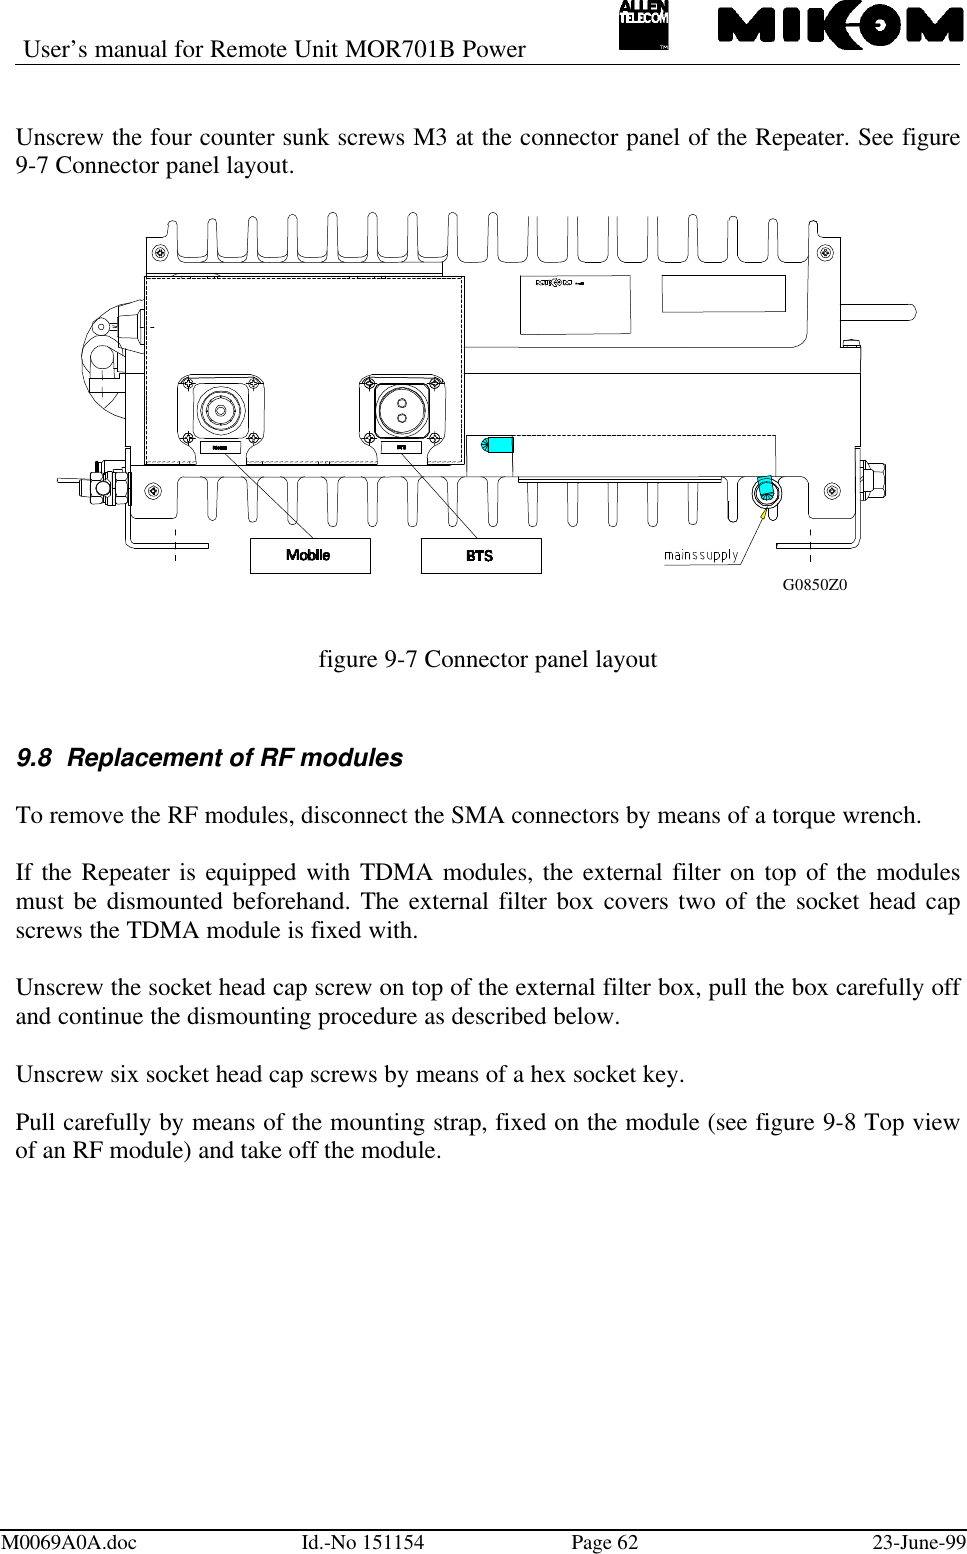 User’s manual for Remote Unit MOR701B PowerM0069A0A.doc Id.-No 151154 Page 62 23-June-99Unscrew the four counter sunk screws M3 at the connector panel of the Repeater. See figure9-7 Connector panel layout.figure 9-7 Connector panel layout9.8 Replacement of RF modulesTo remove the RF modules, disconnect the SMA connectors by means of a torque wrench.If the Repeater is equipped with TDMA modules, the external filter on top of the modulesmust be dismounted beforehand. The external filter box covers two of the socket head capscrews the TDMA module is fixed with.Unscrew the socket head cap screw on top of the external filter box, pull the box carefully offand continue the dismounting procedure as described below.Unscrew six socket head cap screws by means of a hex socket key.Pull carefully by means of the mounting strap, fixed on the module (see figure 9-8 Top viewof an RF module) and take off the module.G0850Z0